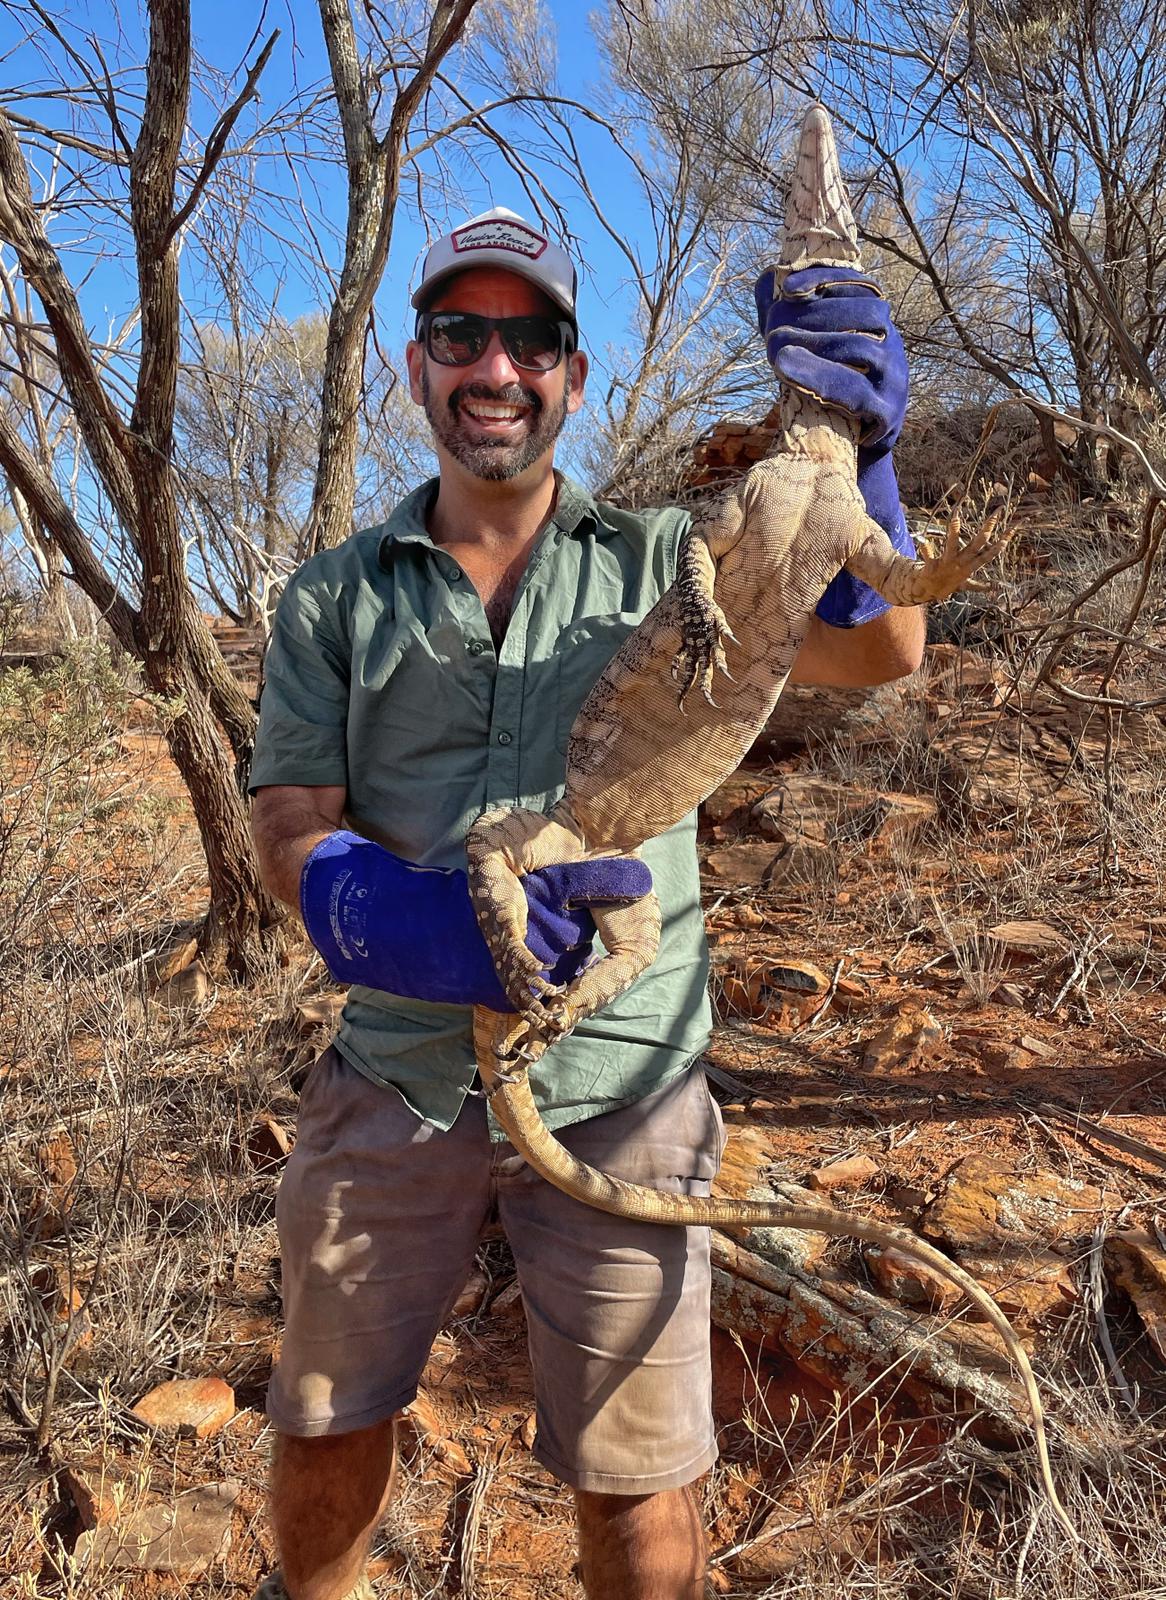 Christofer Clemente, the head of the animal biomechanics and biorobotics lab, holding a Perentie Lizard on a research trip in the Northern Territory, Australia